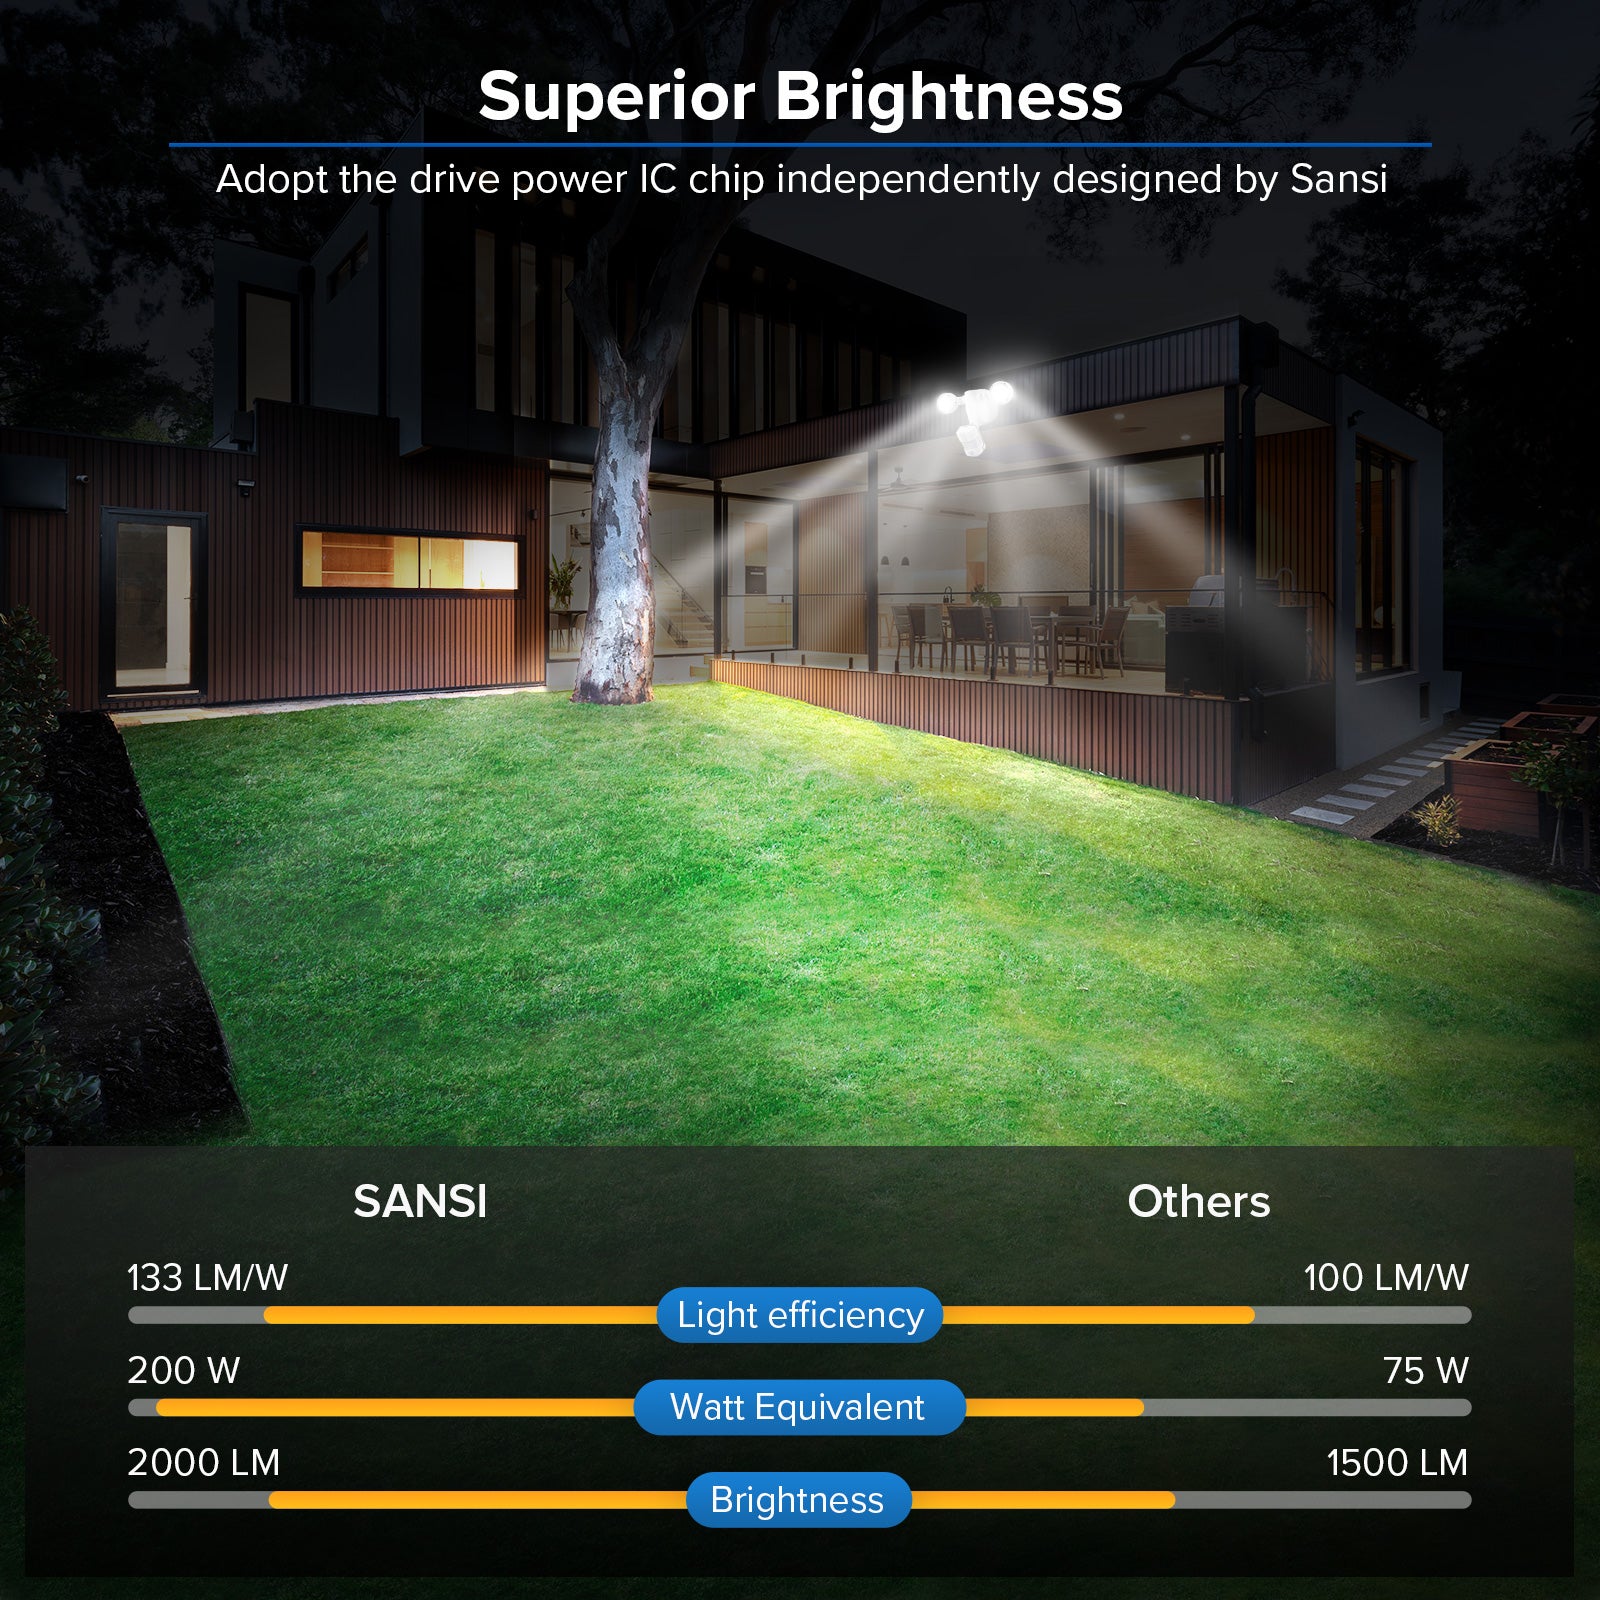 15W LED Security Light (Dusk to Dawn & Motion Sensor) adopt the drive power IC chip independently designed by SANSI, superior brightness